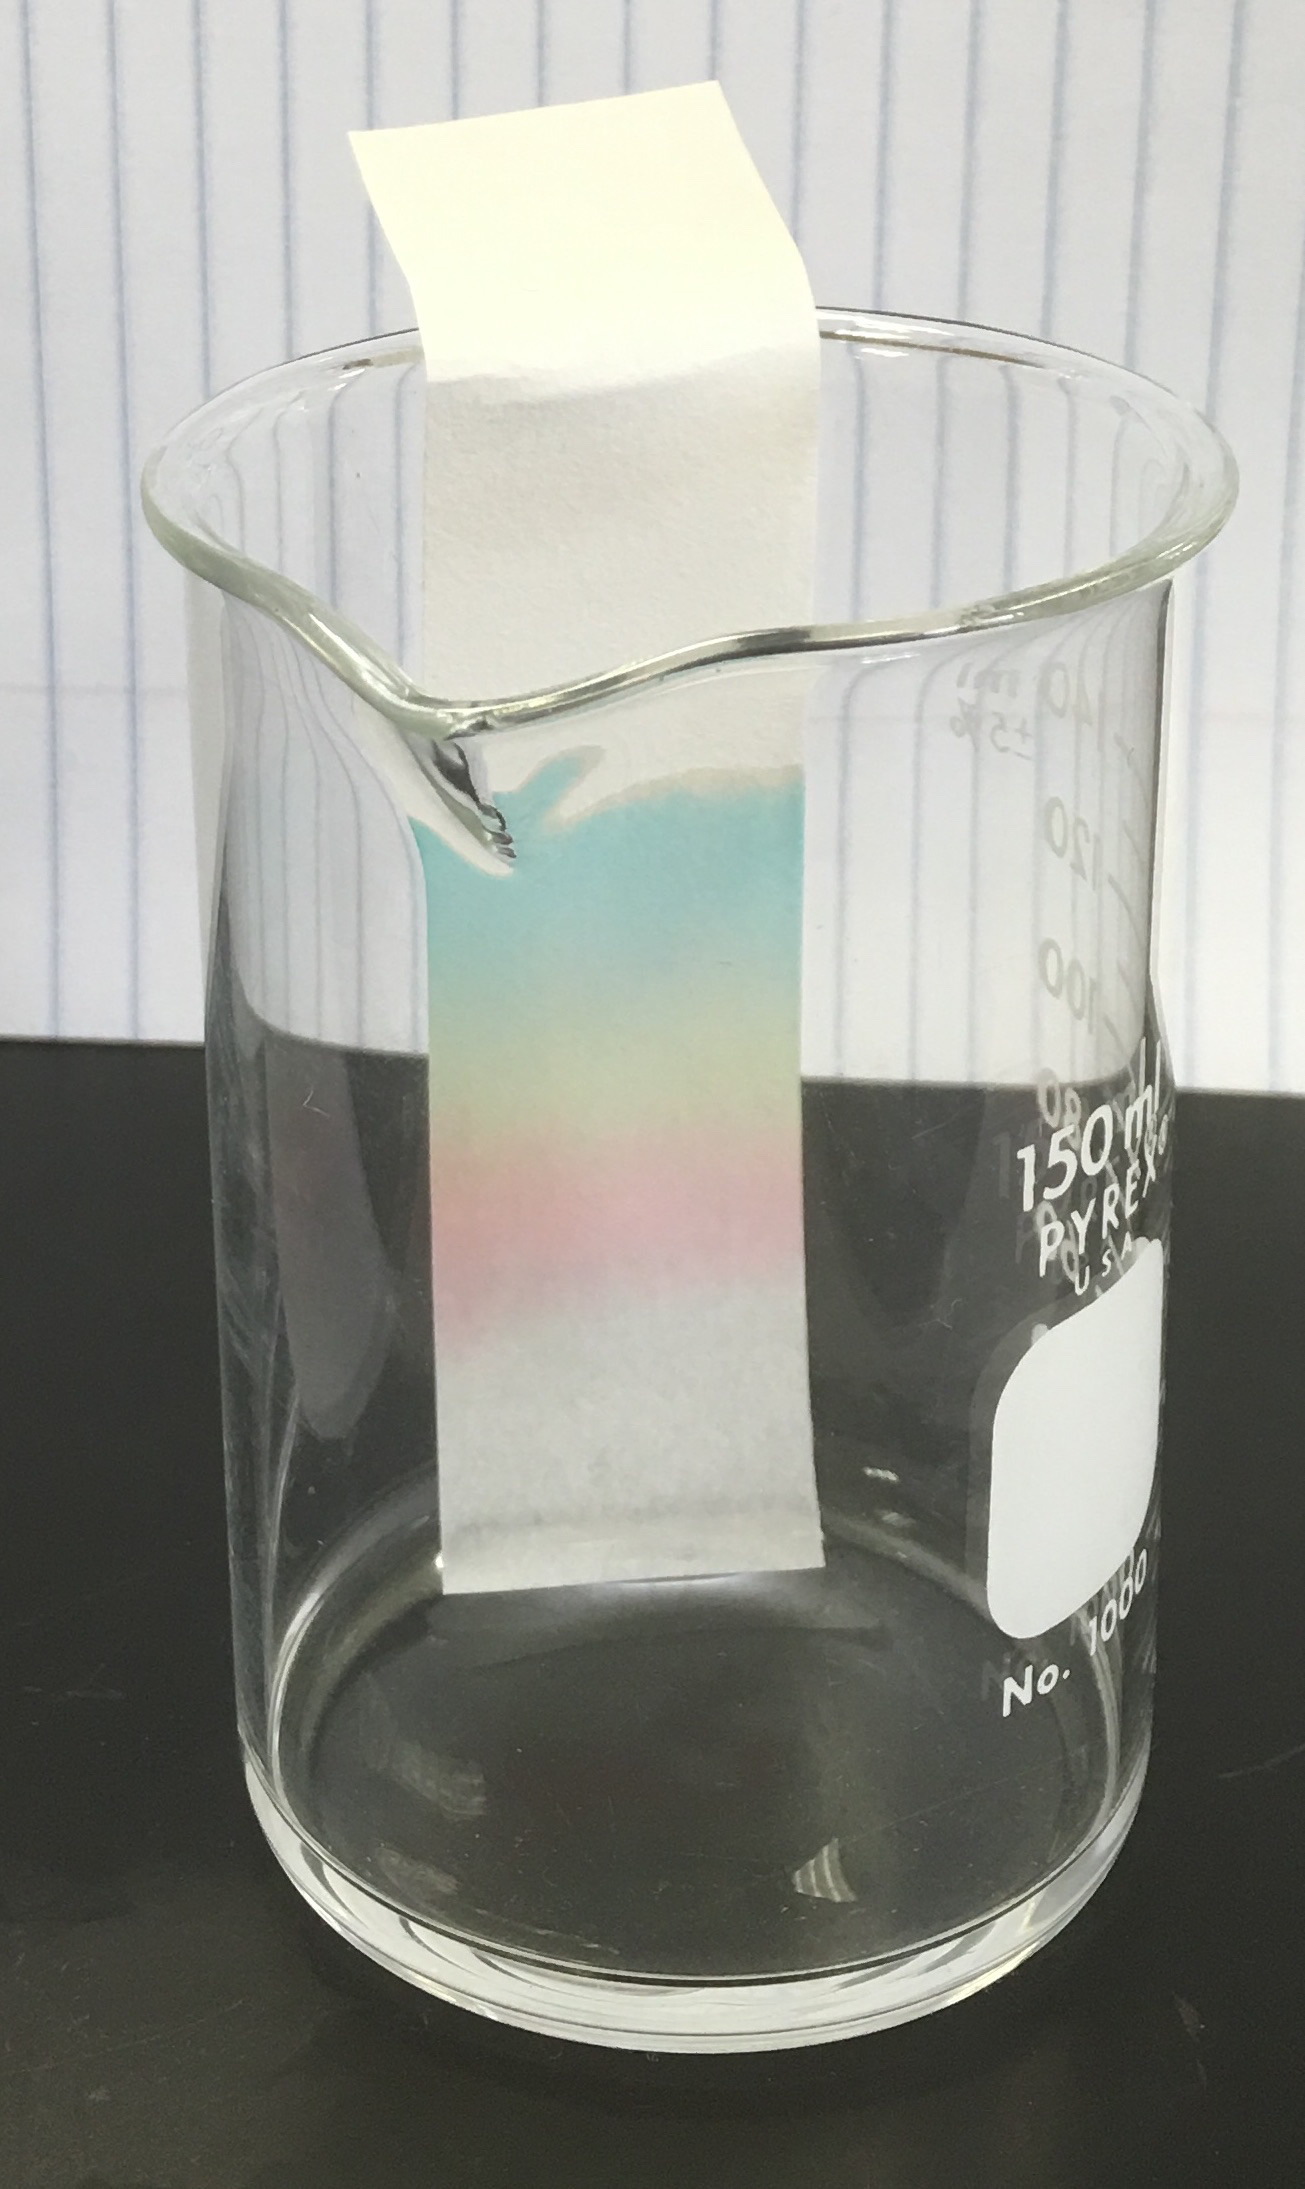 Result of the Chromatography experiment.